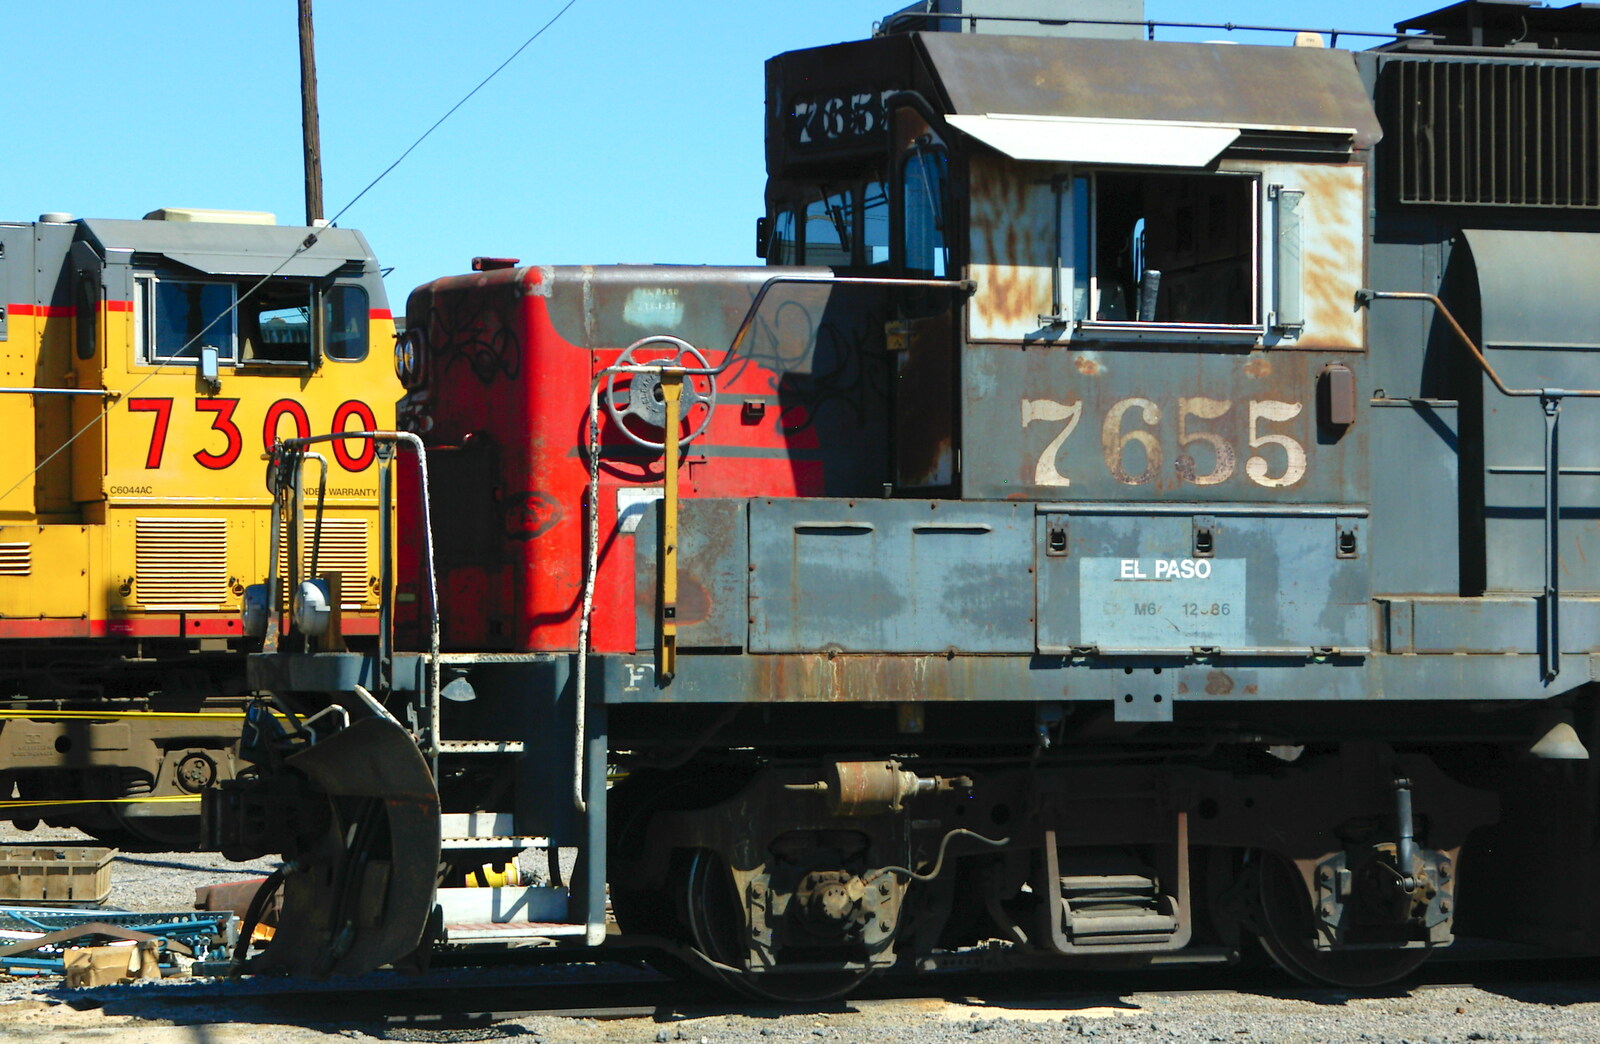 7300 and 7655 El Paso from California Desert: El Centro, Imperial Valley, California, US - 24th September 2005